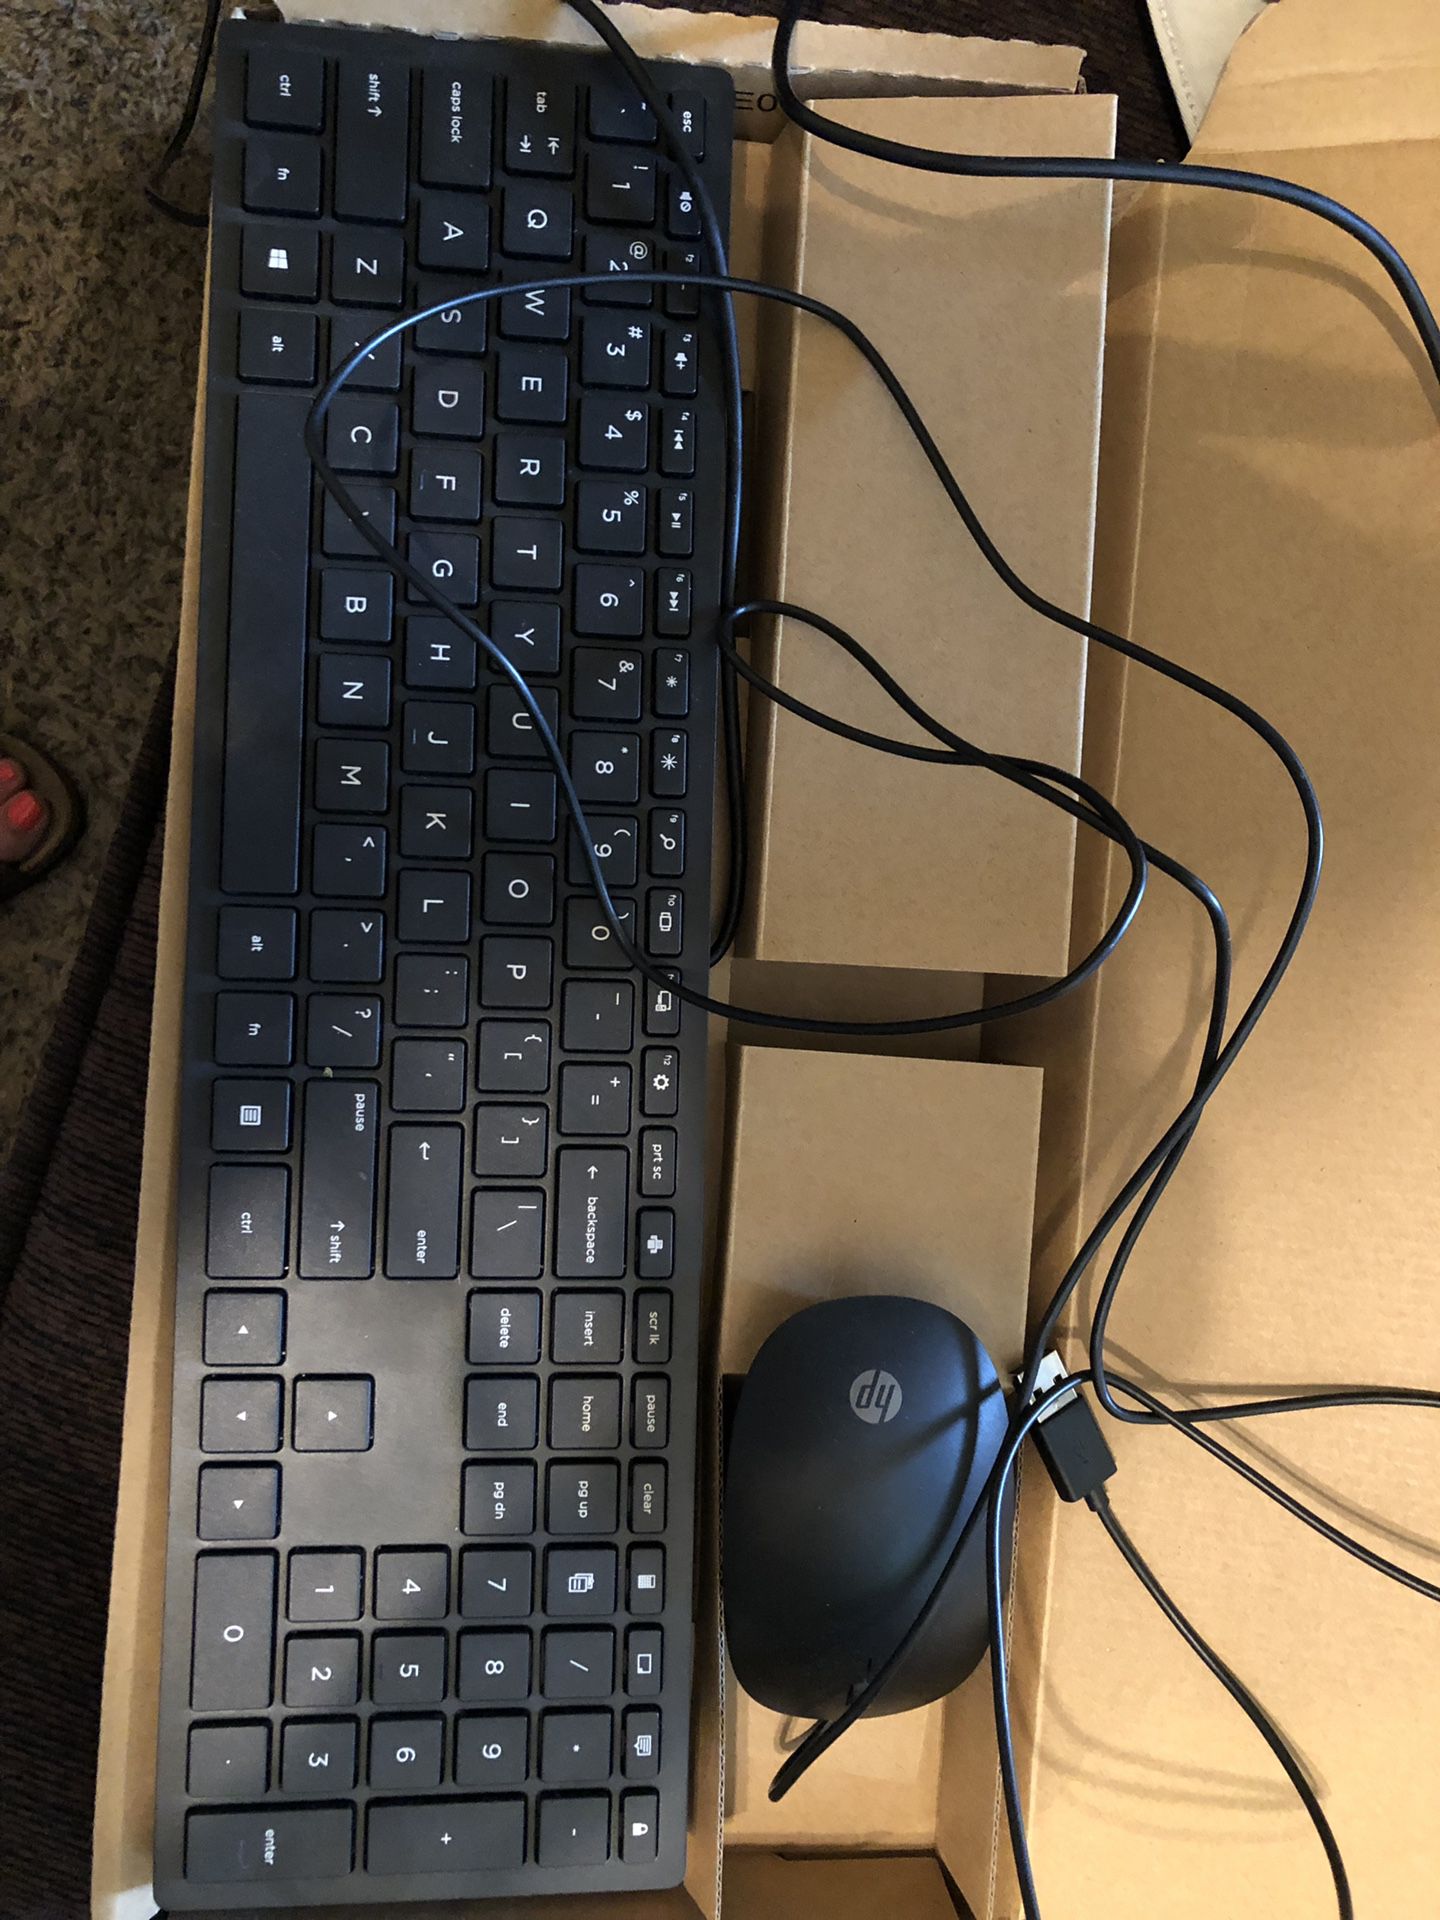 HP wired keyboard and mouse. Brand new. Never used